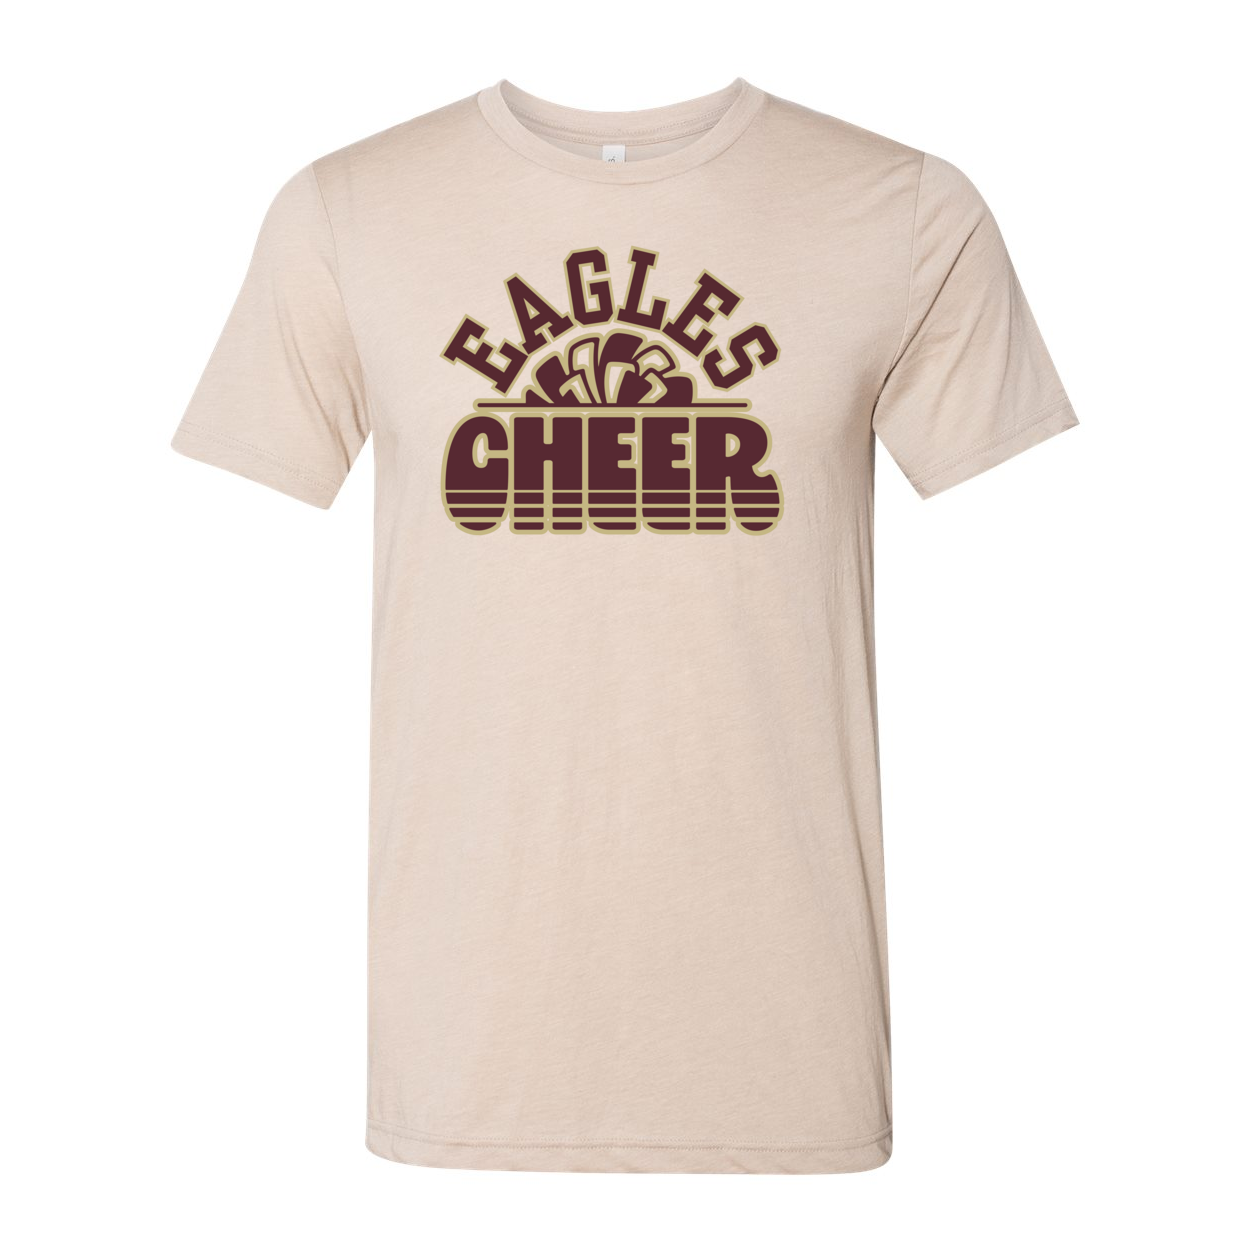 Adult Unisex Super Soft Eagles Cheer Short Sleeve Graphic Tee - New Albany Eagles